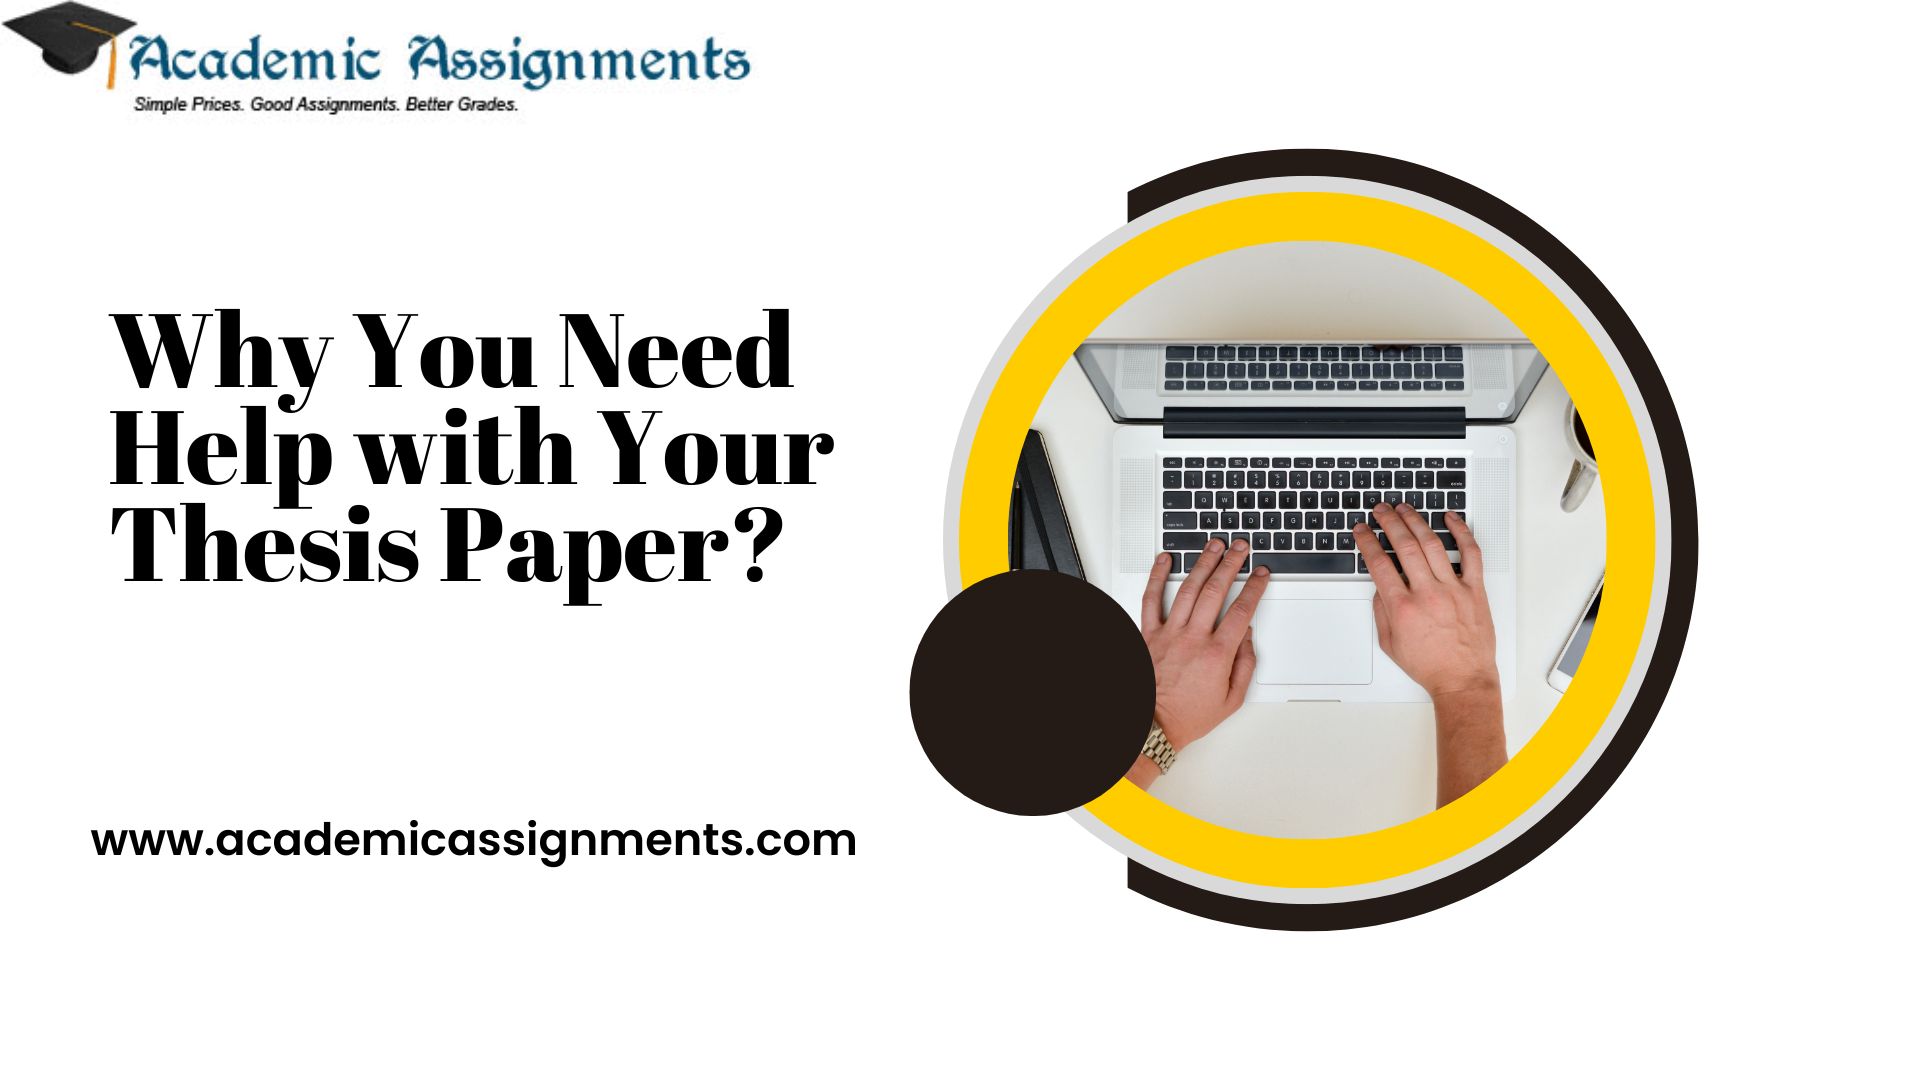 Why You Need Help with Your Thesis Paper